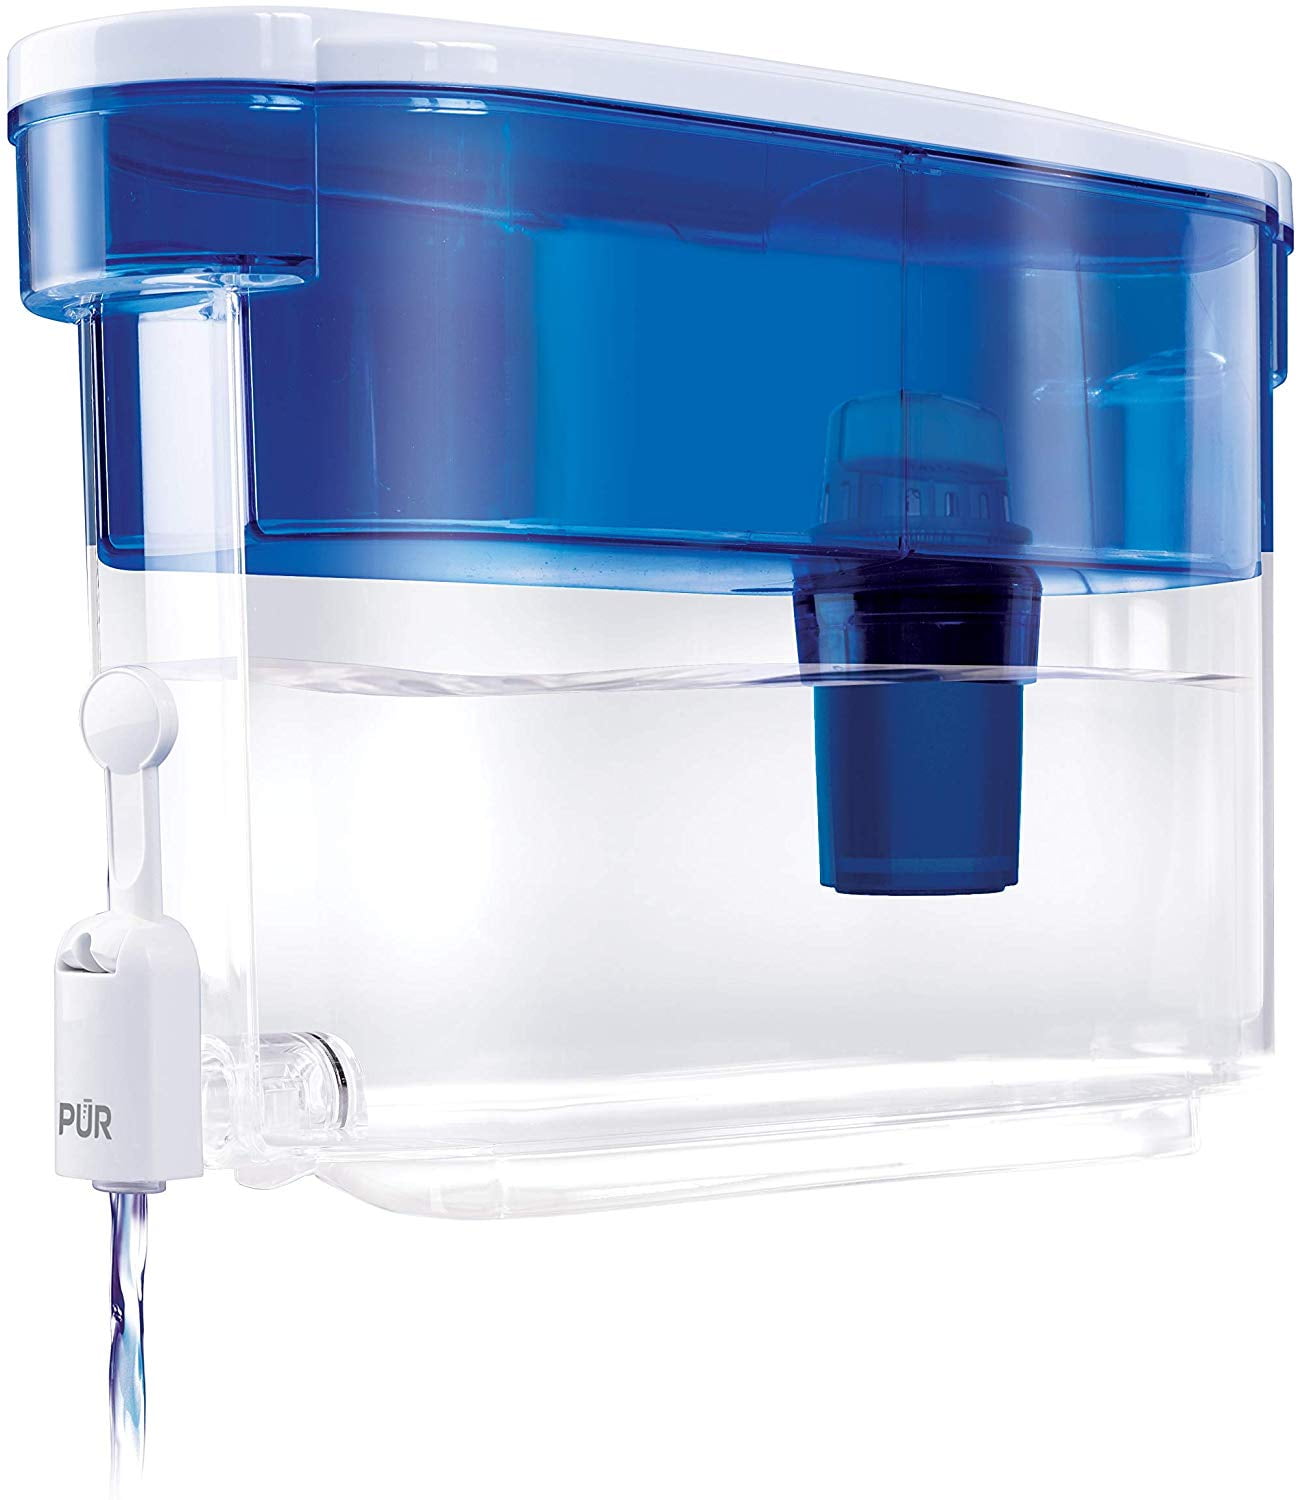 Pur Classic Dispenser Water Filter 30 Cup Ds1800z Blue